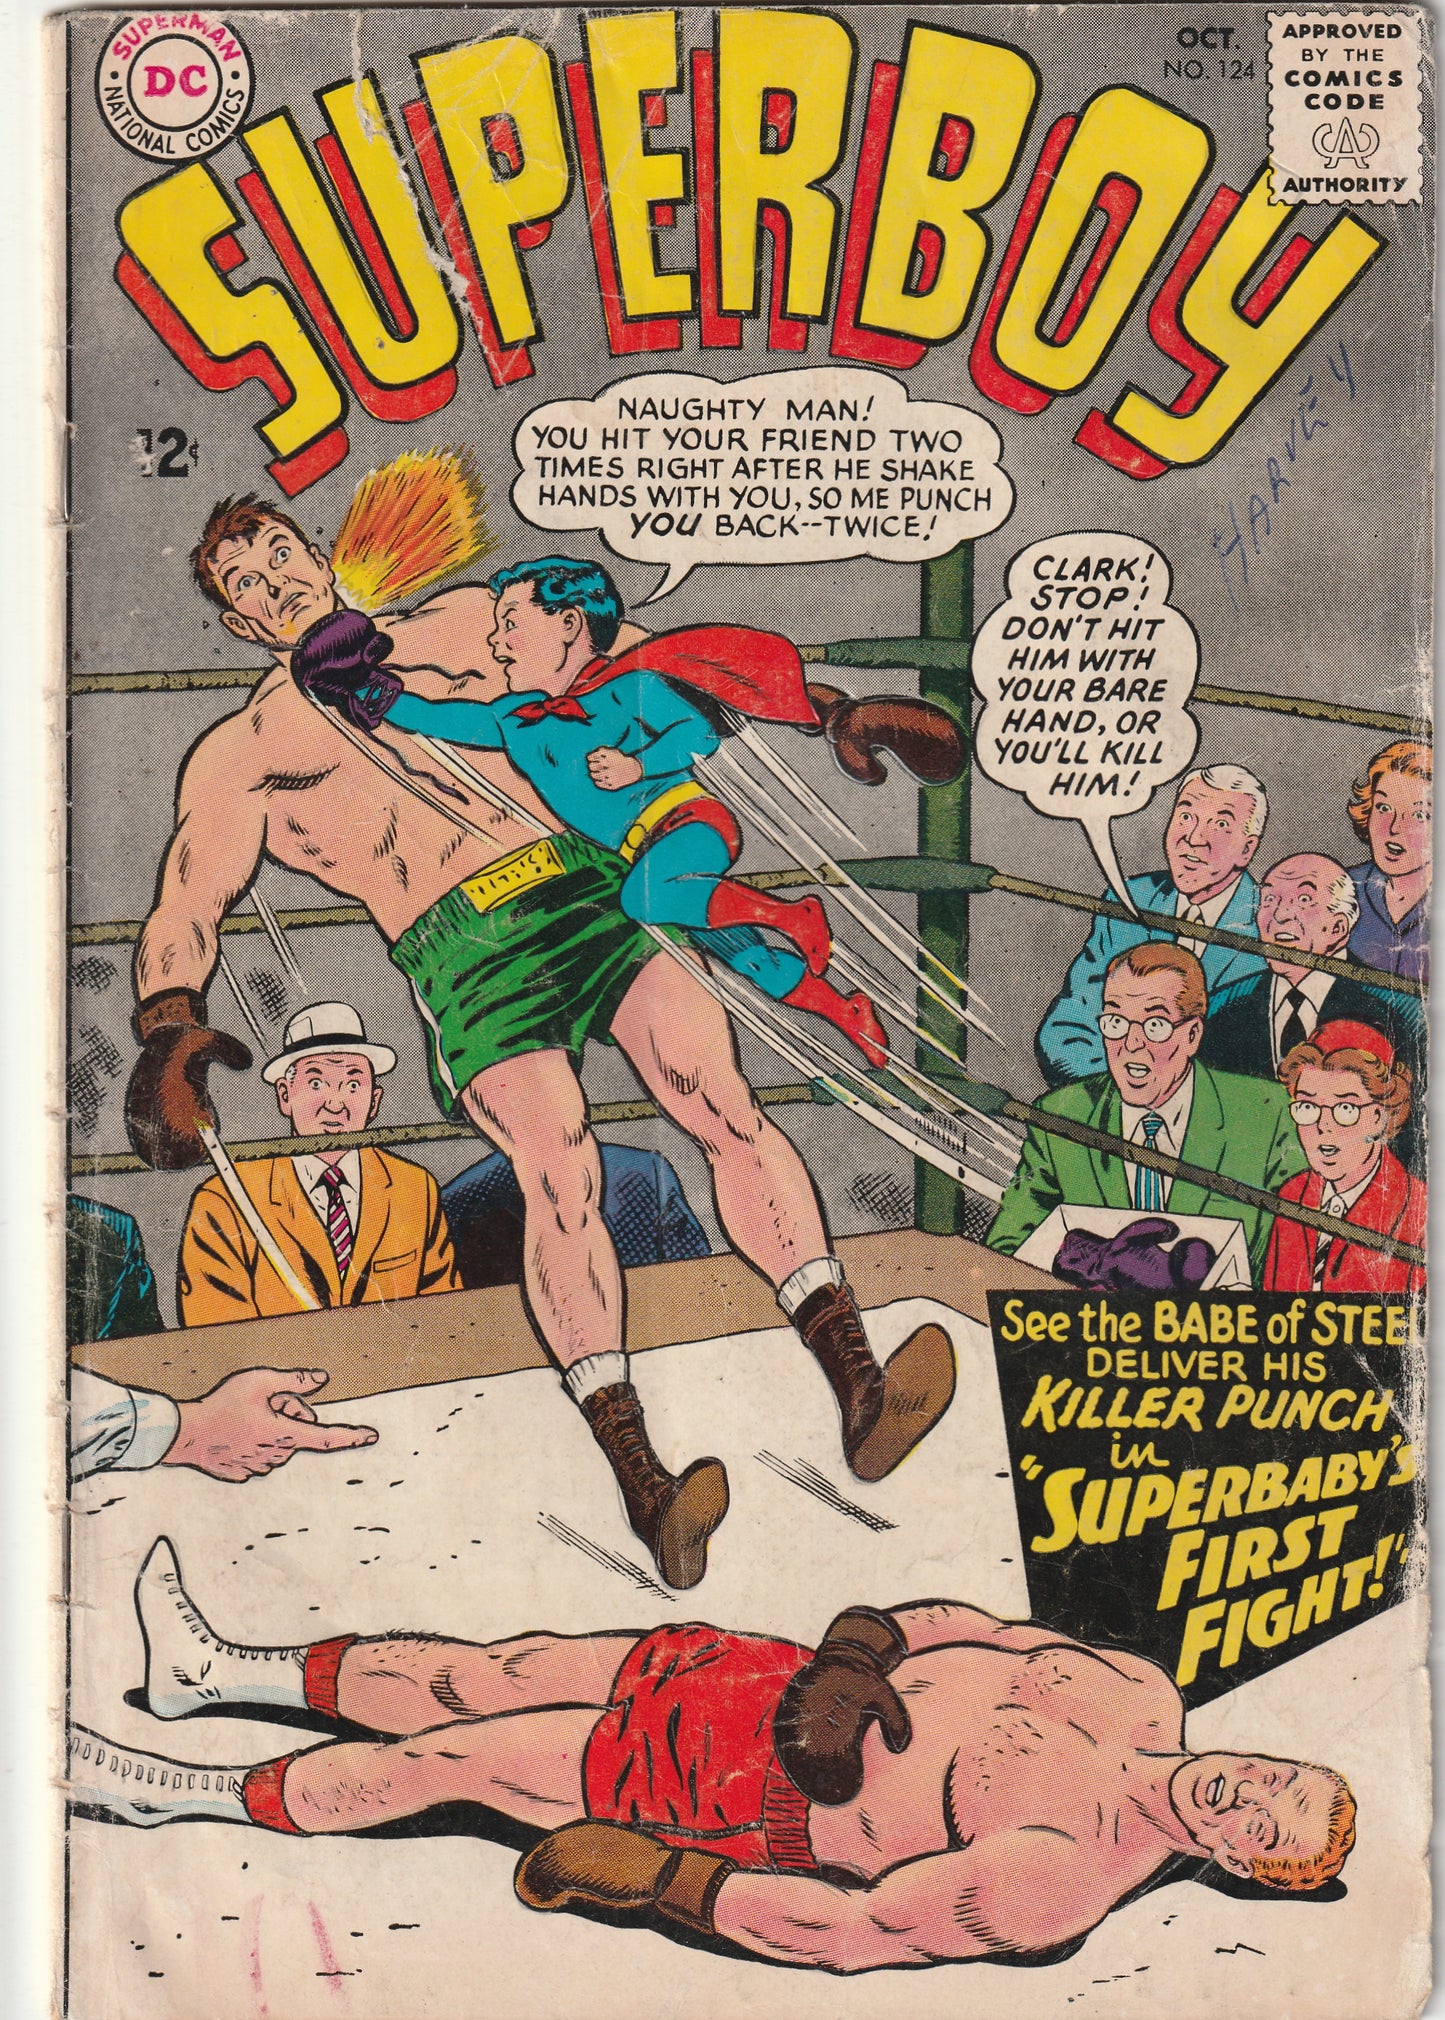 Superboy #124 (1965) - 1st Appearance Insect Queen (Lana Lang)